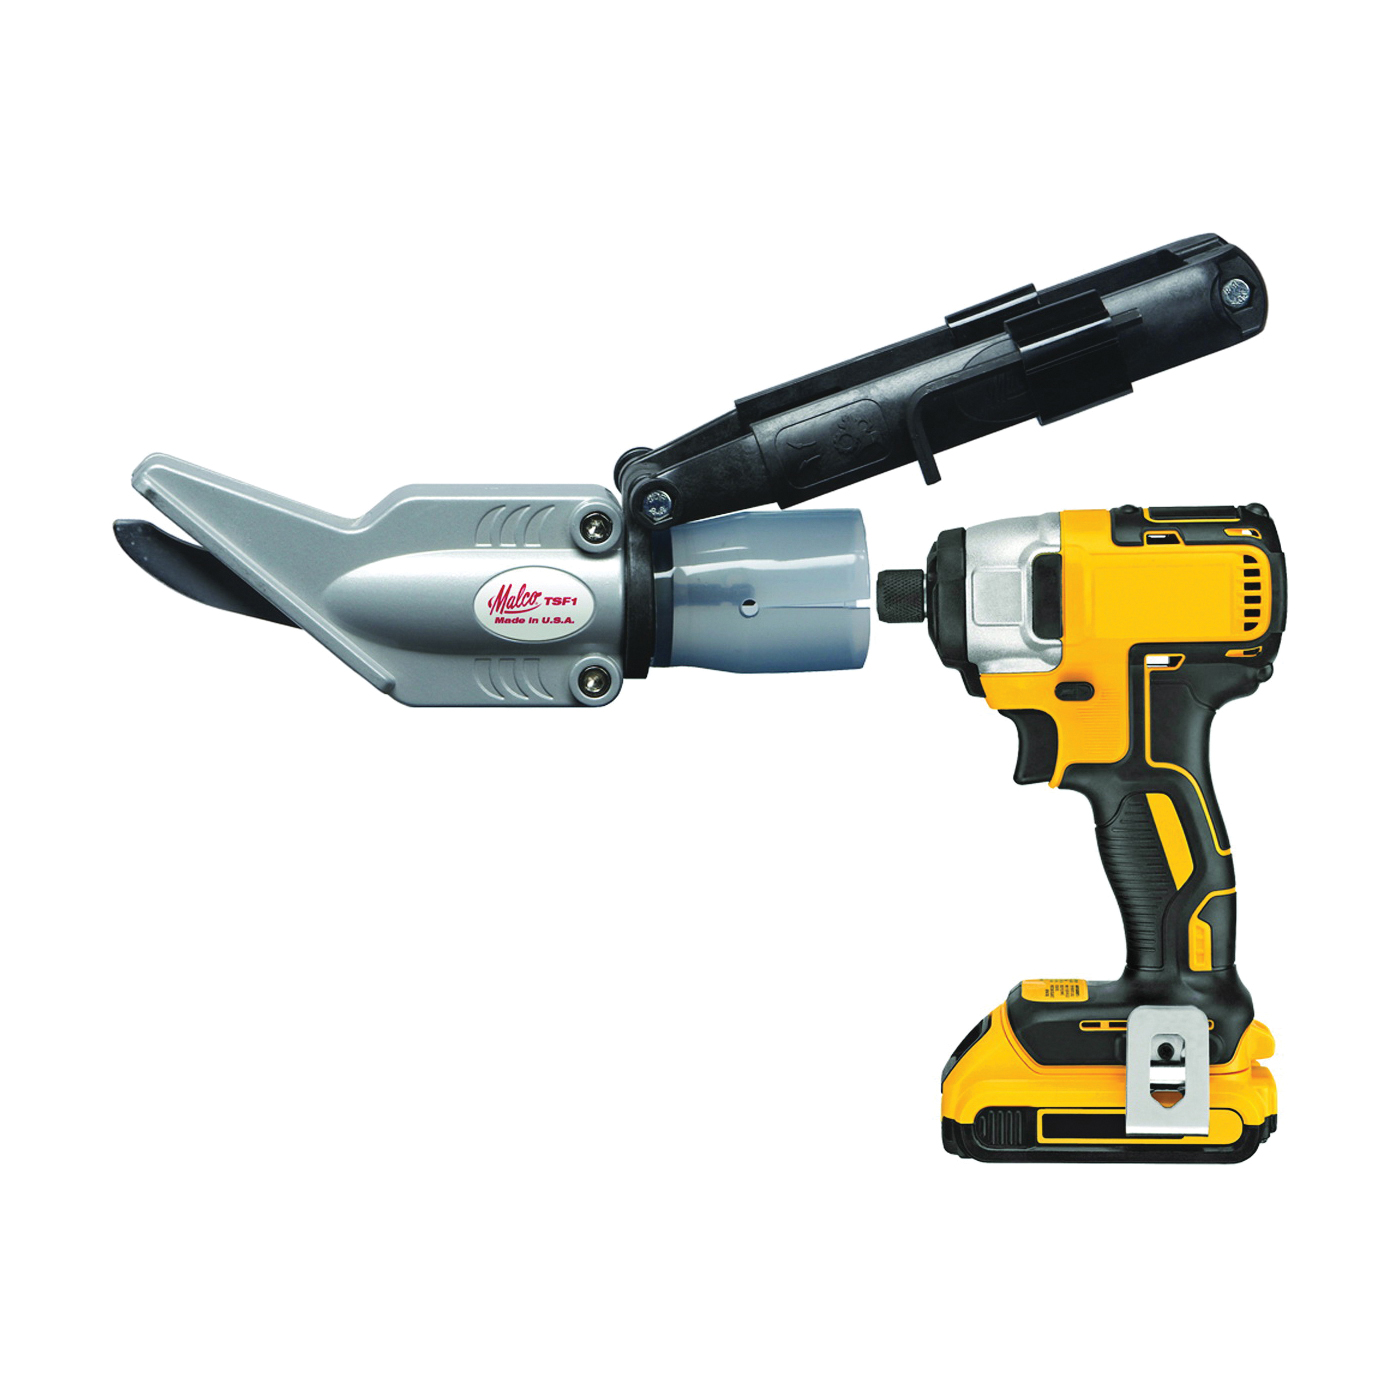 TSF1 Siding Shear Attachment, Steel, For: 14.4 V or Larger Cordless or Standard A/C Power Drills